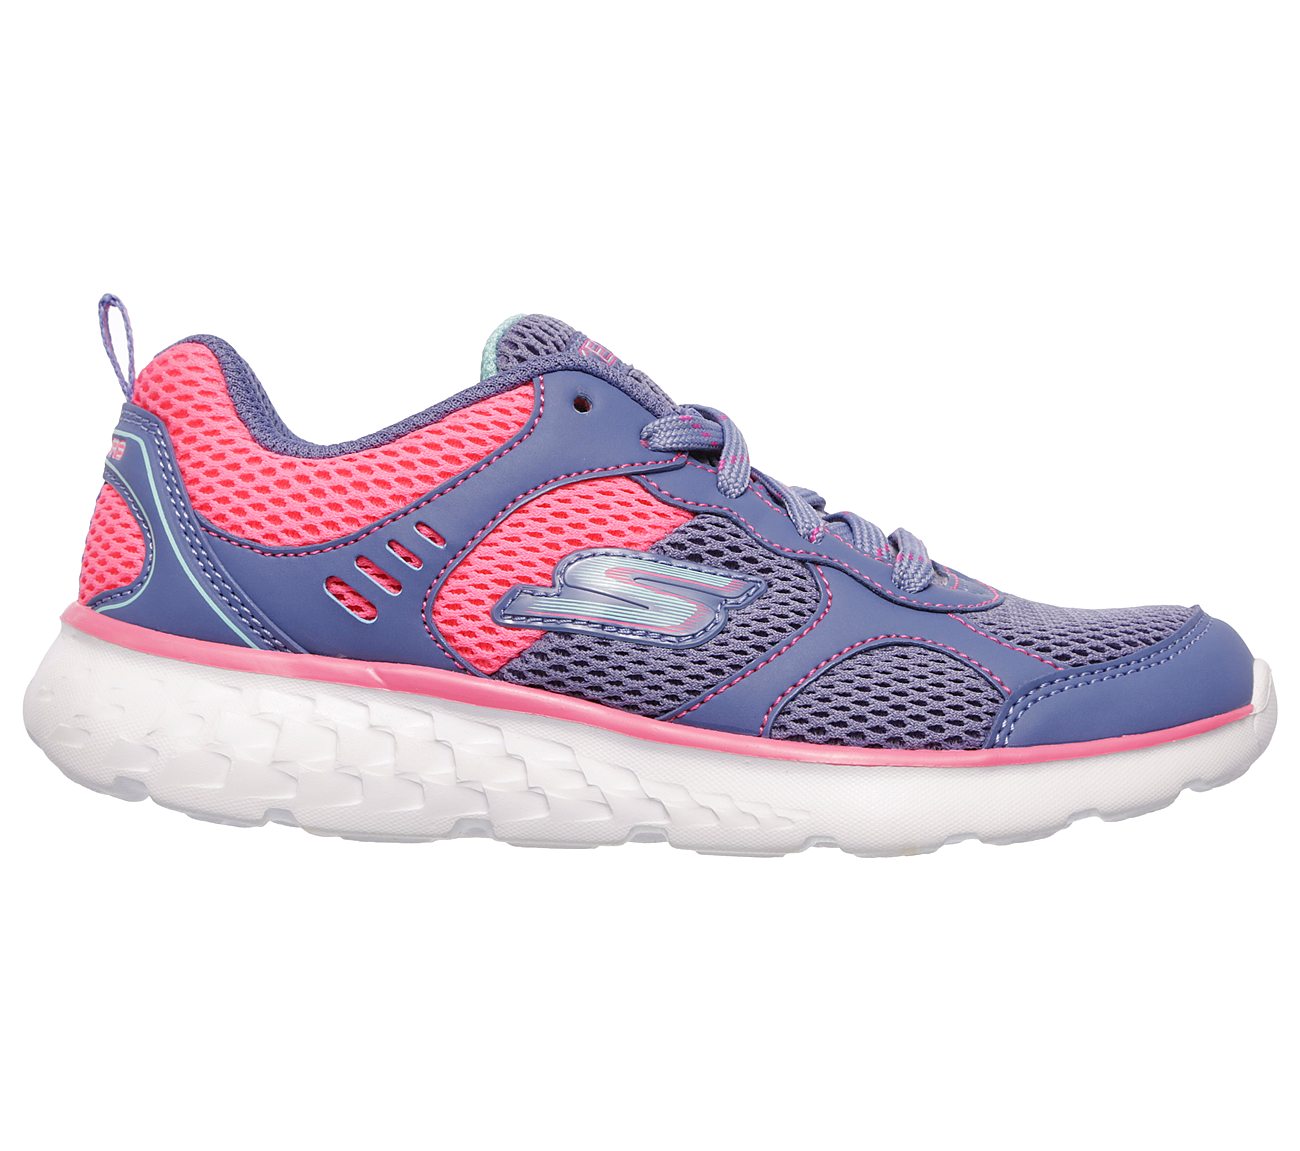 GO RUN 400, BLUE/NEON PINK Footwear Right View